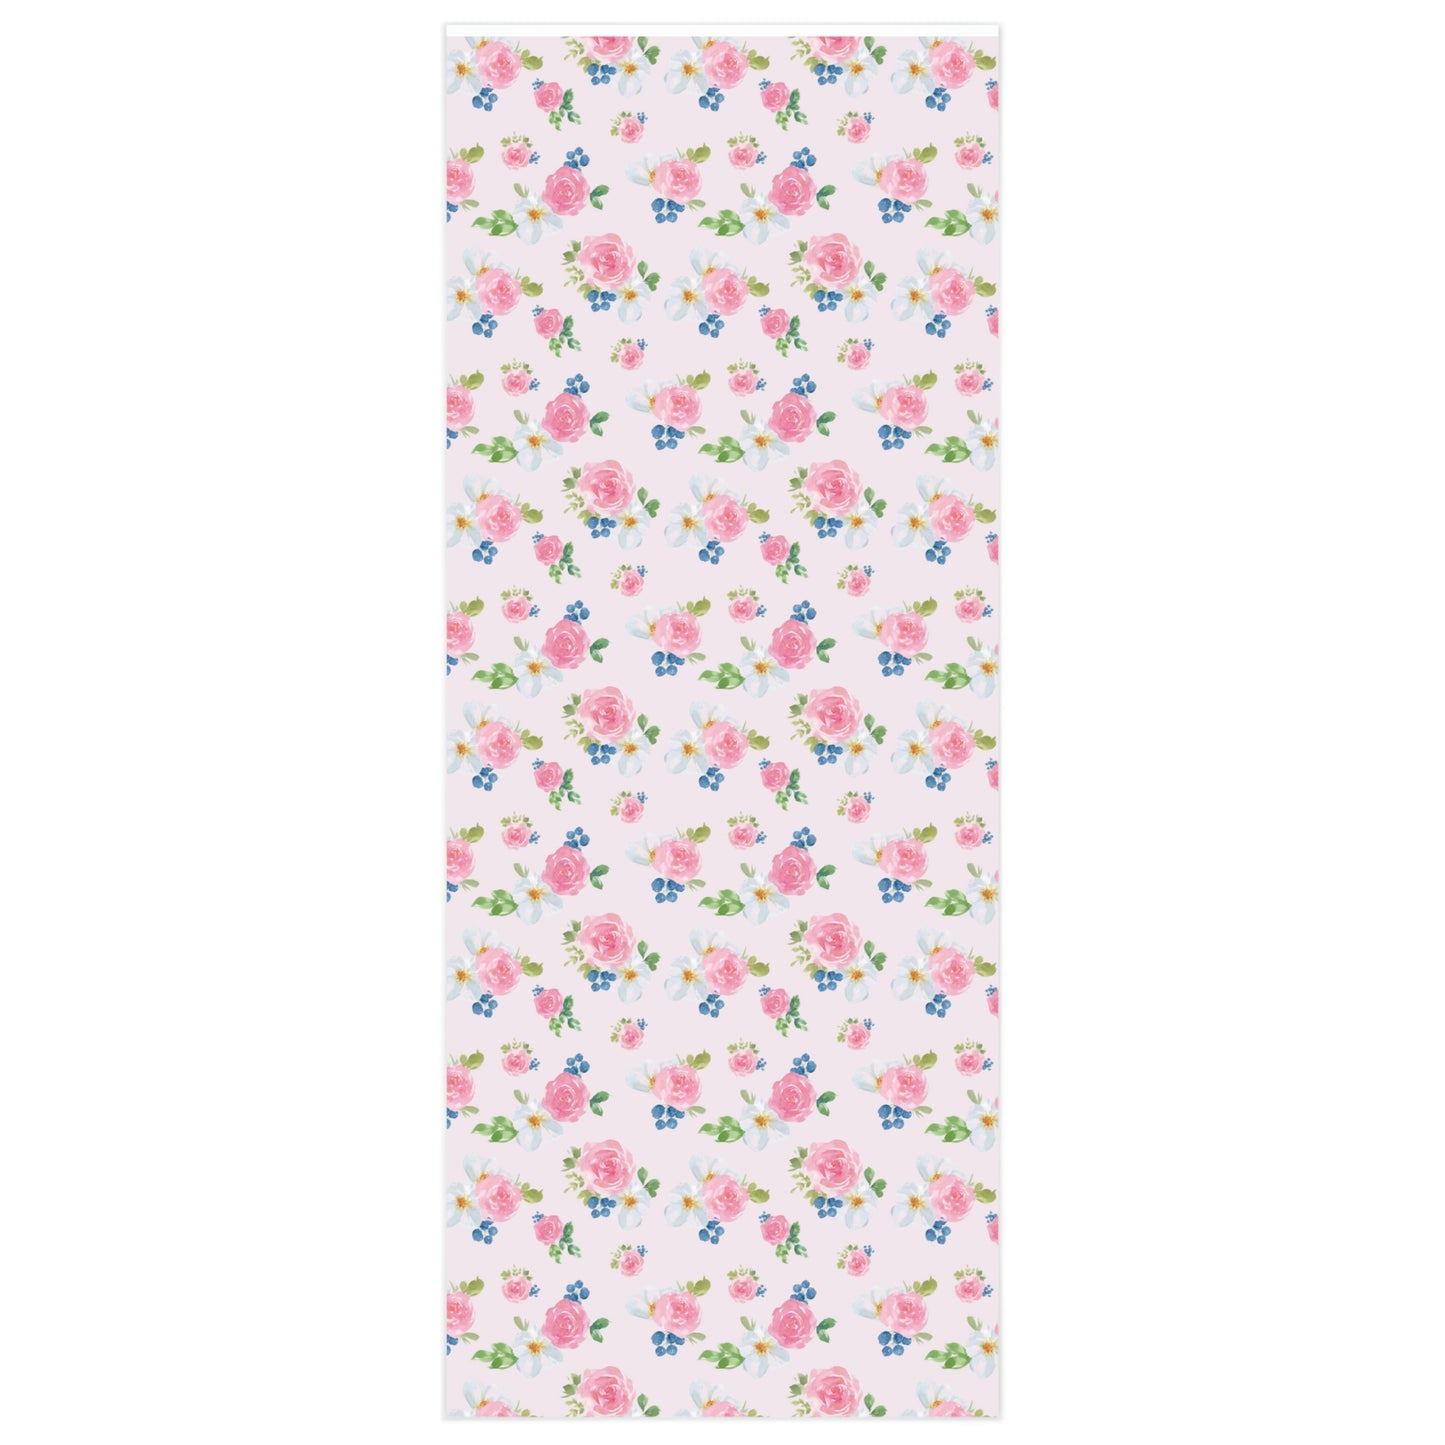 Vintage Pink Floral Wrapping Paper